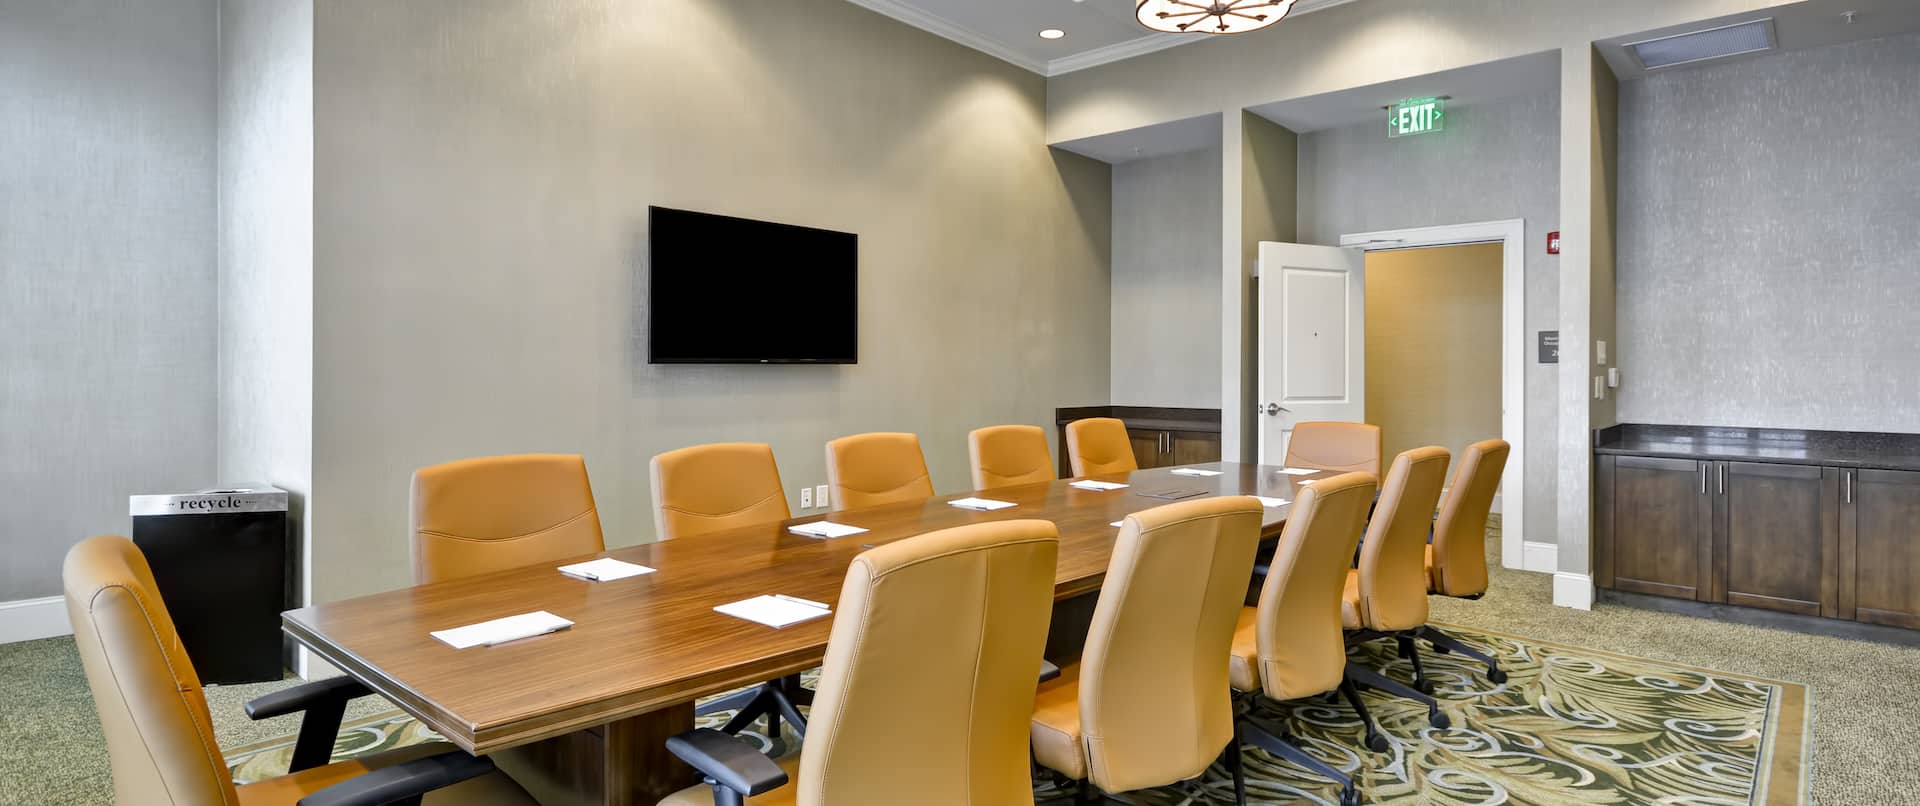 Boardroom with Wall Mounted TV